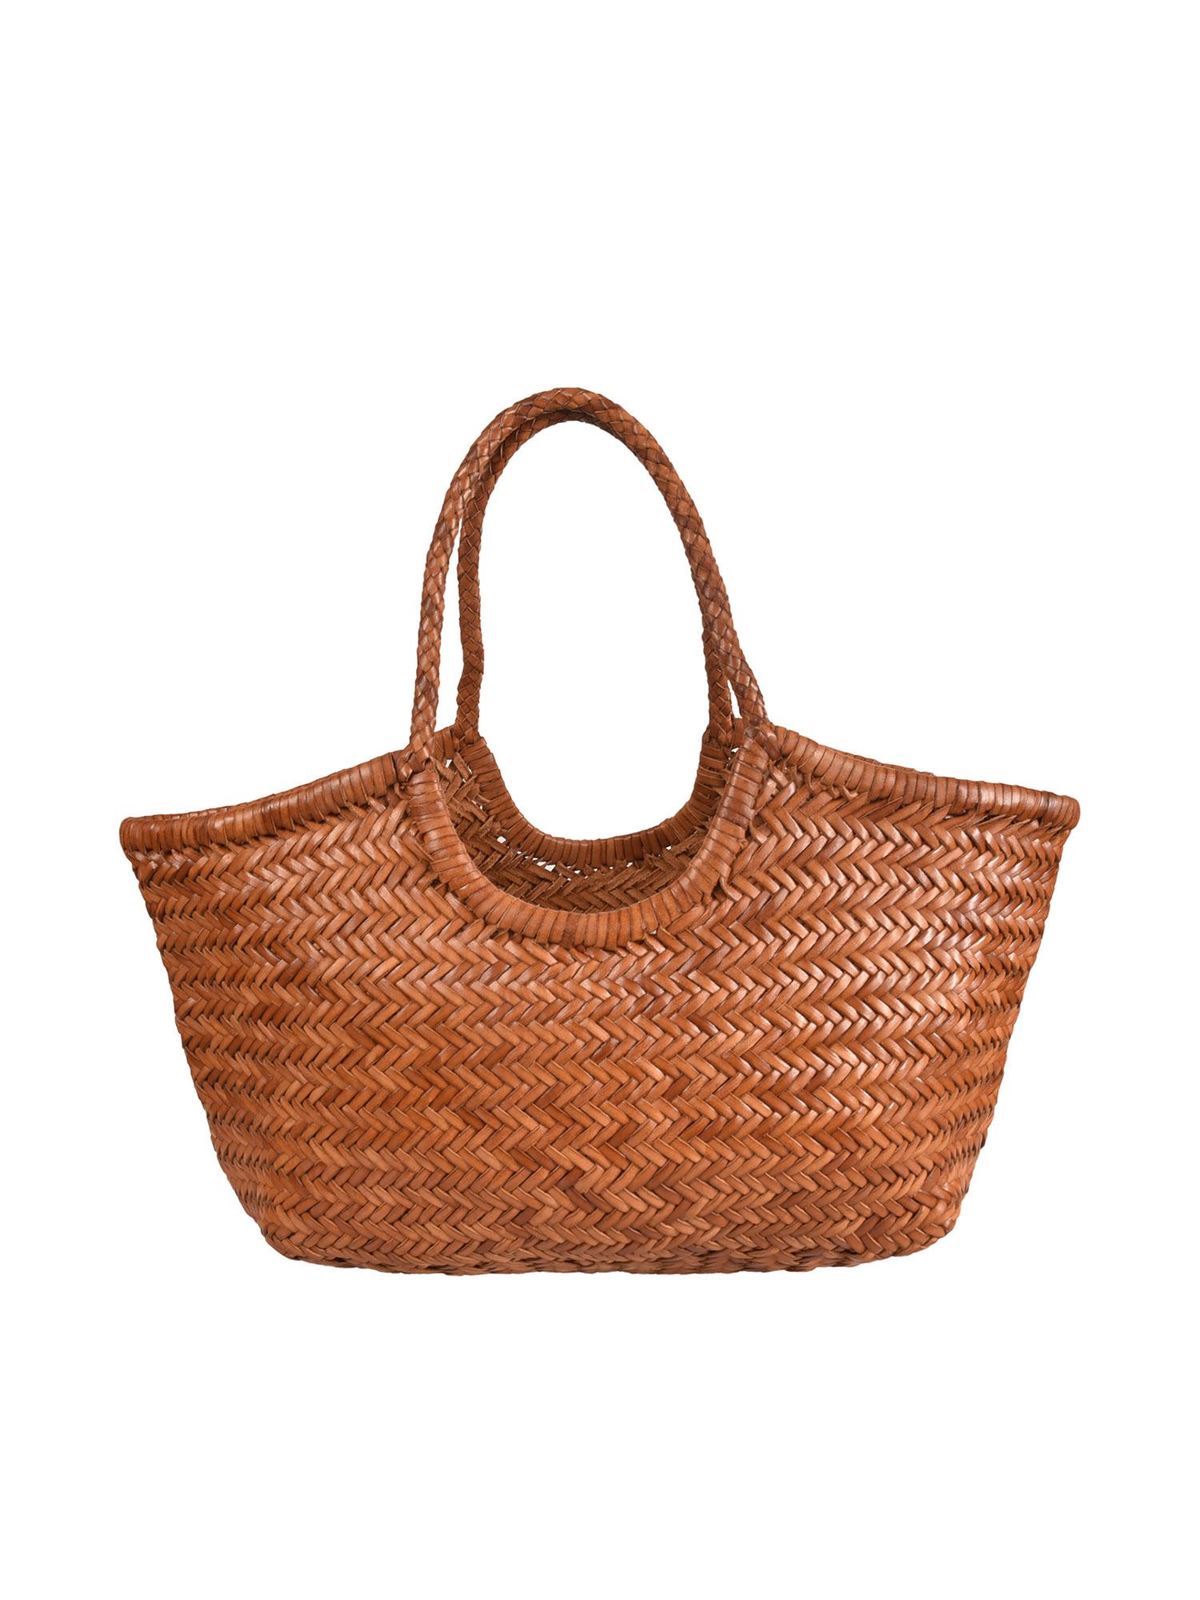 A Nantucket basket purse by Jose Formoso Reyes 1969 signed and dated to  underside Made In  Na